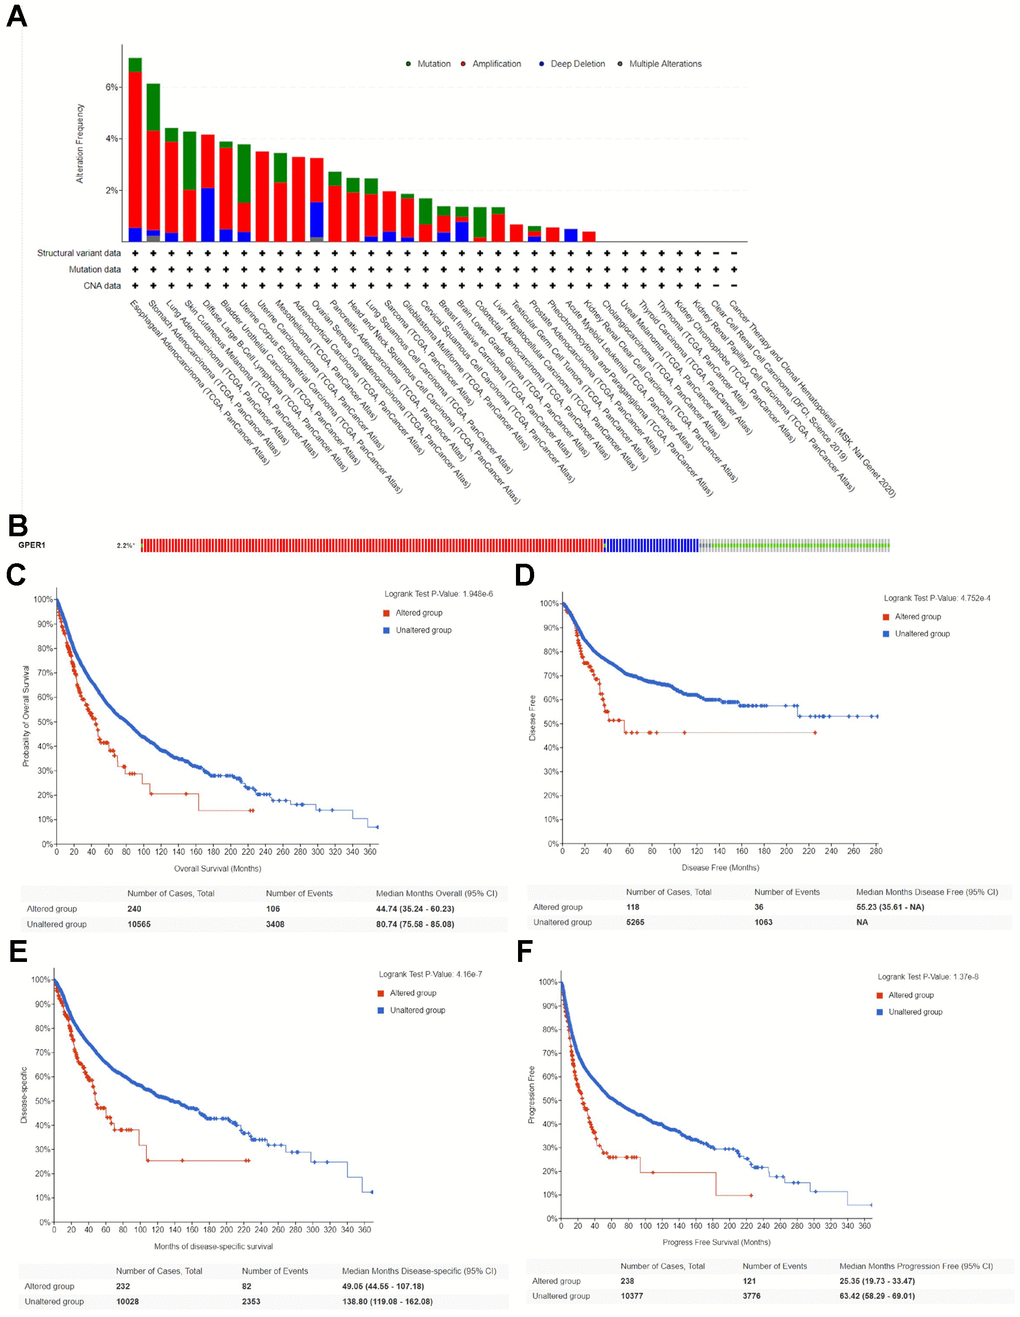 Genetic alteration of GPER1 in pan-cancer. (A) Bar chart of GPER1 mutation in pan-cancer based on TCGA database. (B) The alteration frequency with different types of GPER1 gene mutations in pan-cancer. Kaplan-Meier curve of (C) OS, (D) DSS, (E) DFS, (F) PFS in pan-cancer patients with altered (red) and unaltered (blue) mRNA expression of the GPER1 gene.